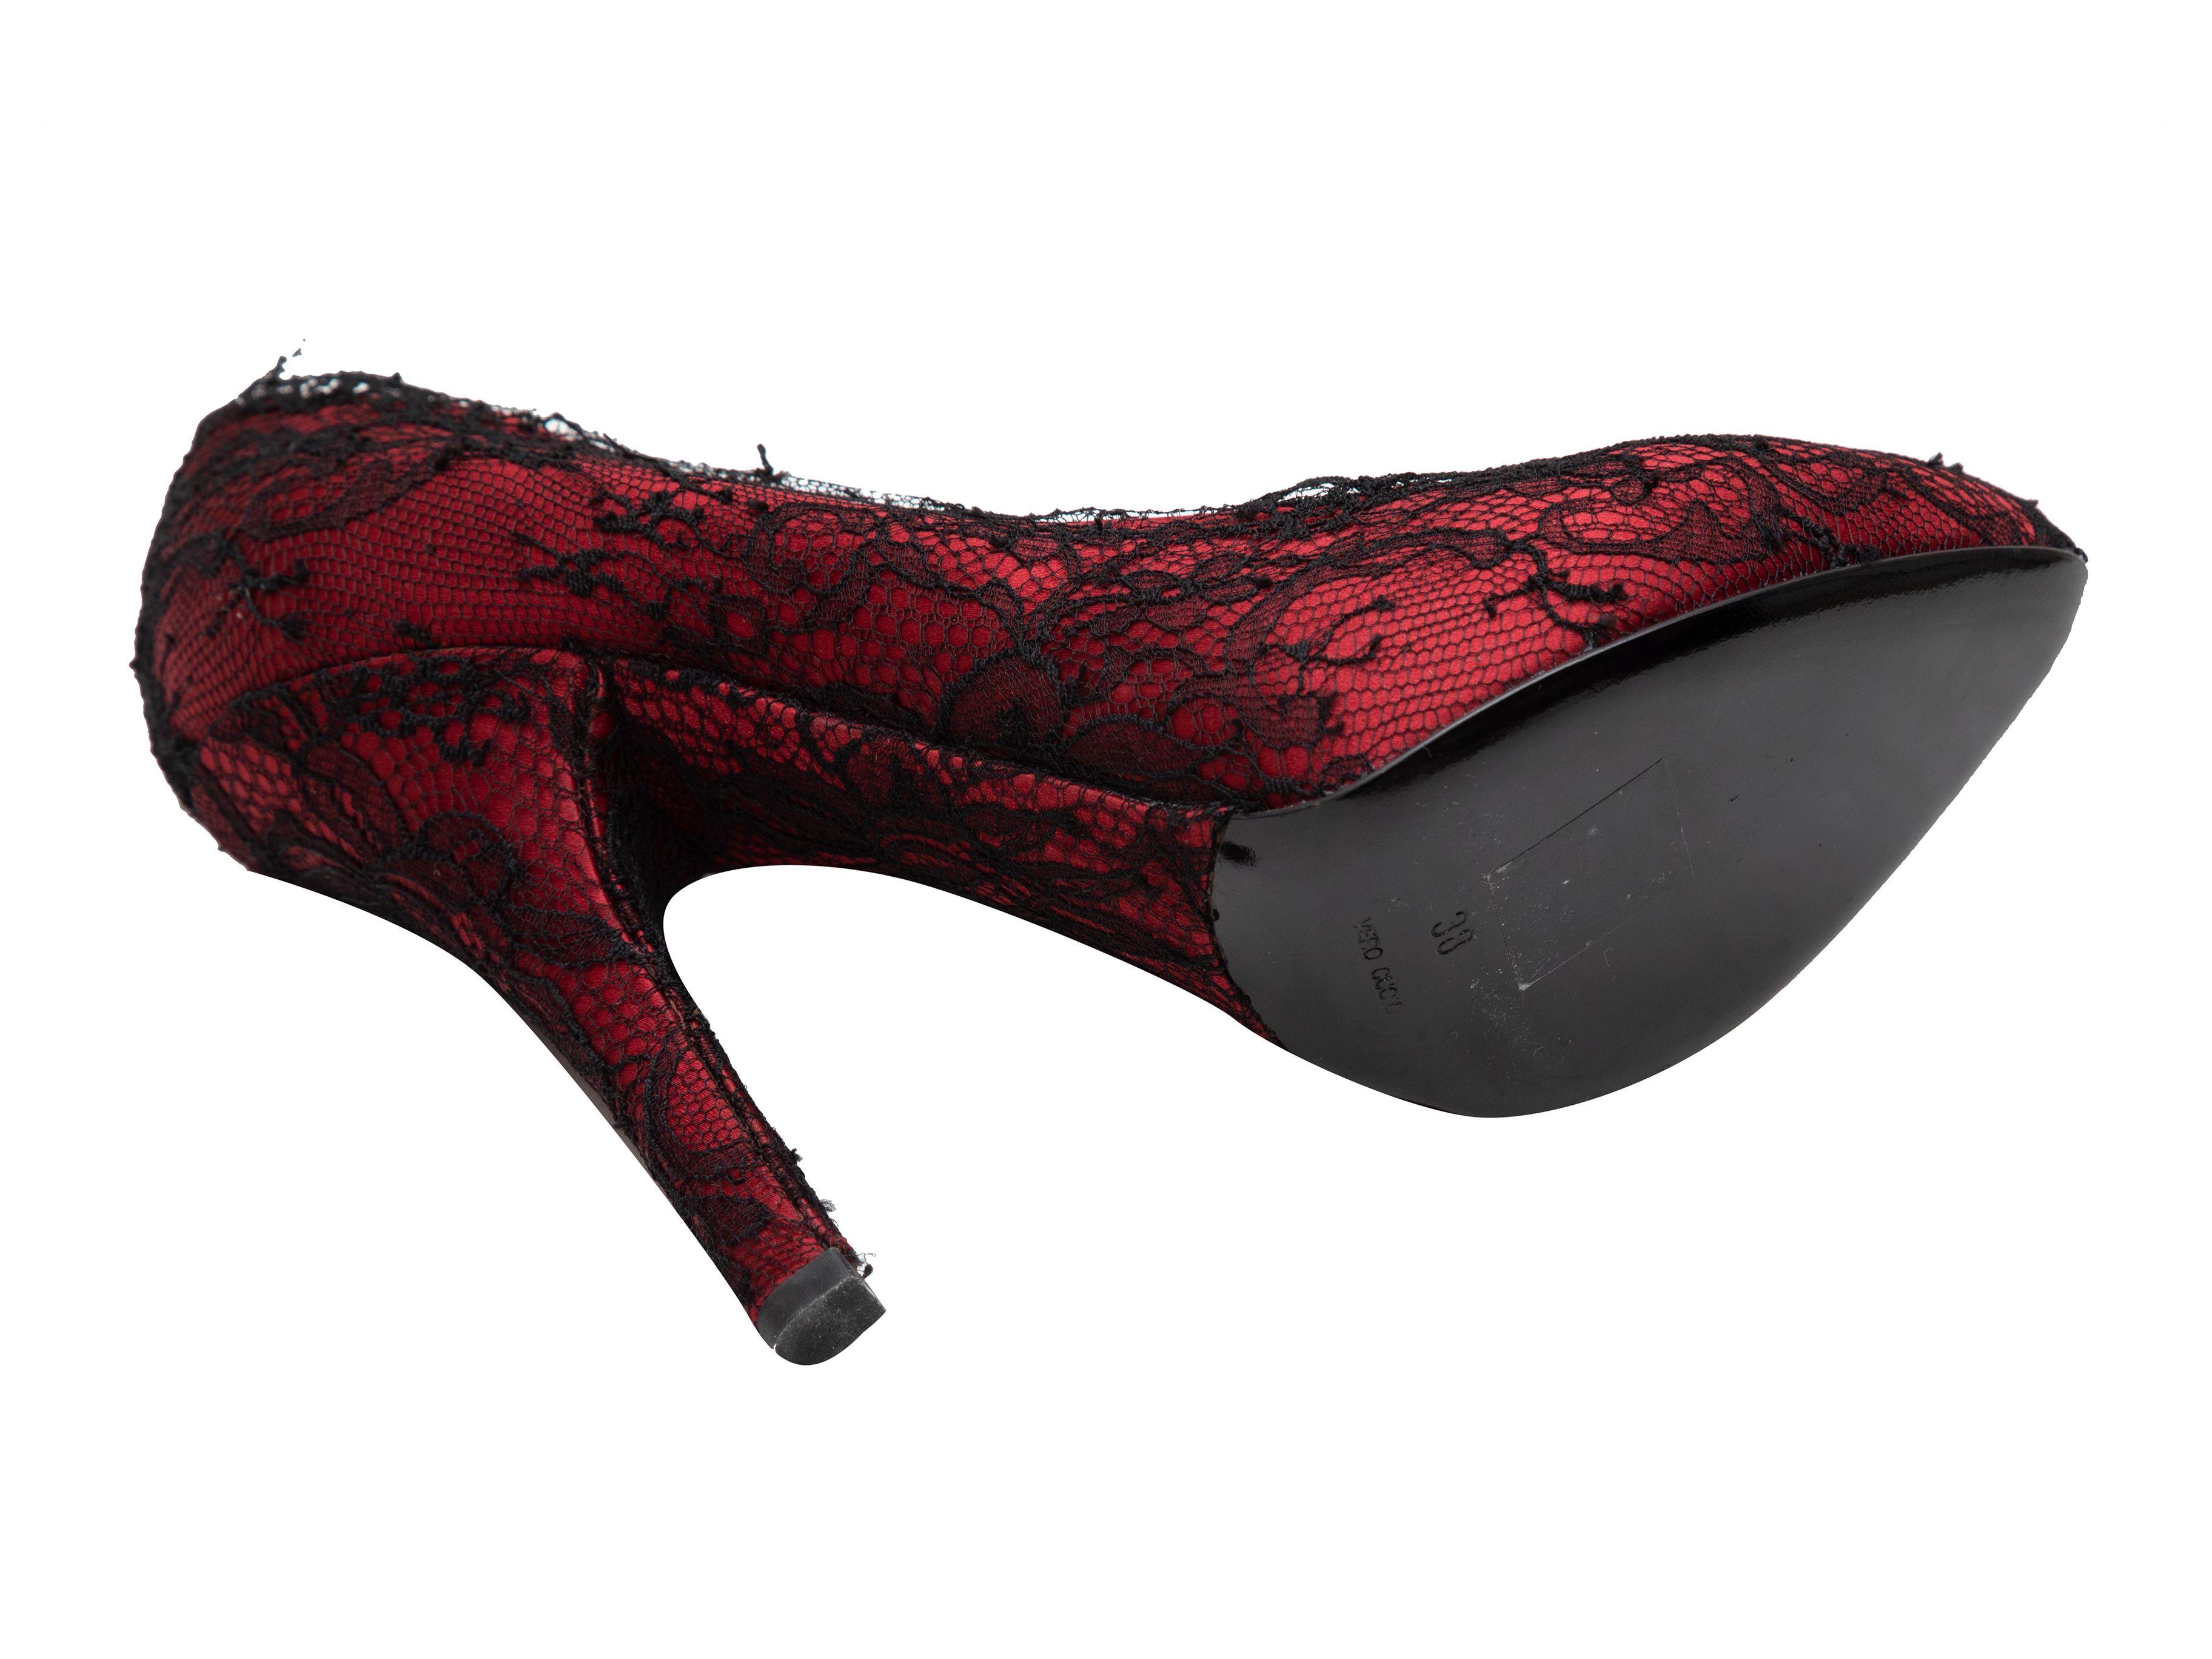 Product Details: Red and black satin and lace overlay almond-toe pumps by Dolce & Gabbana. 5